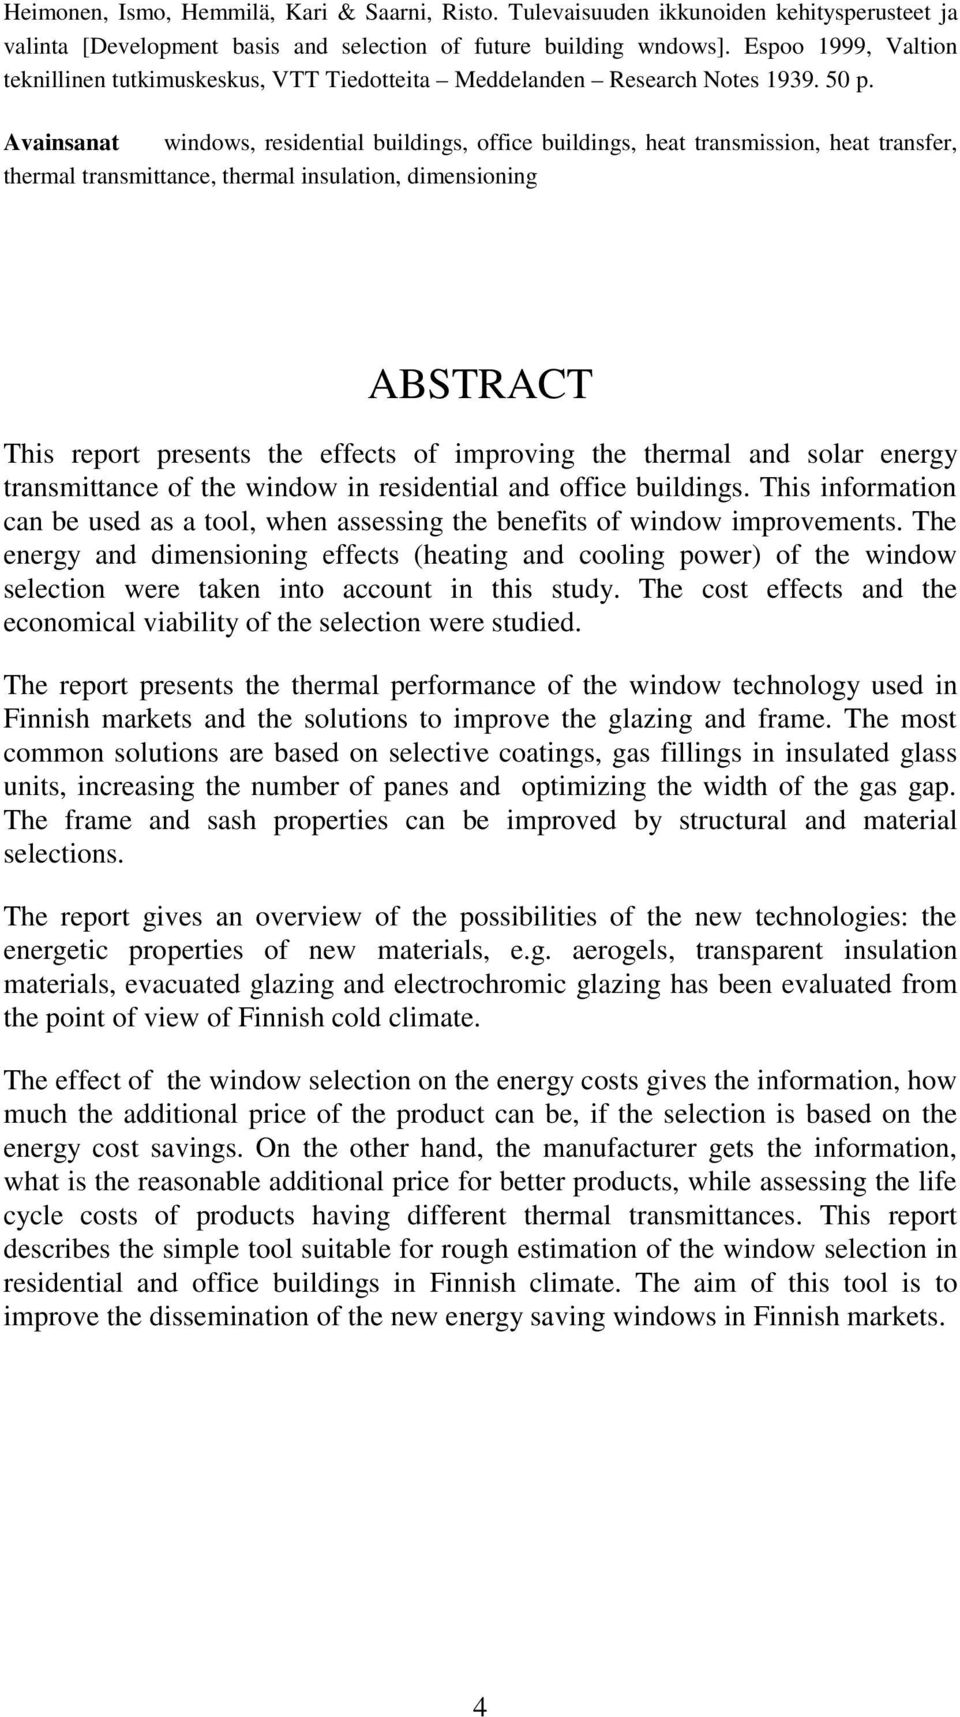 Avainsanat windows, residential buildings, office buildings, heat transmission, heat transfer, thermal transmittance, thermal insulation, dimensioning ABSTRACT This report presents the effects of